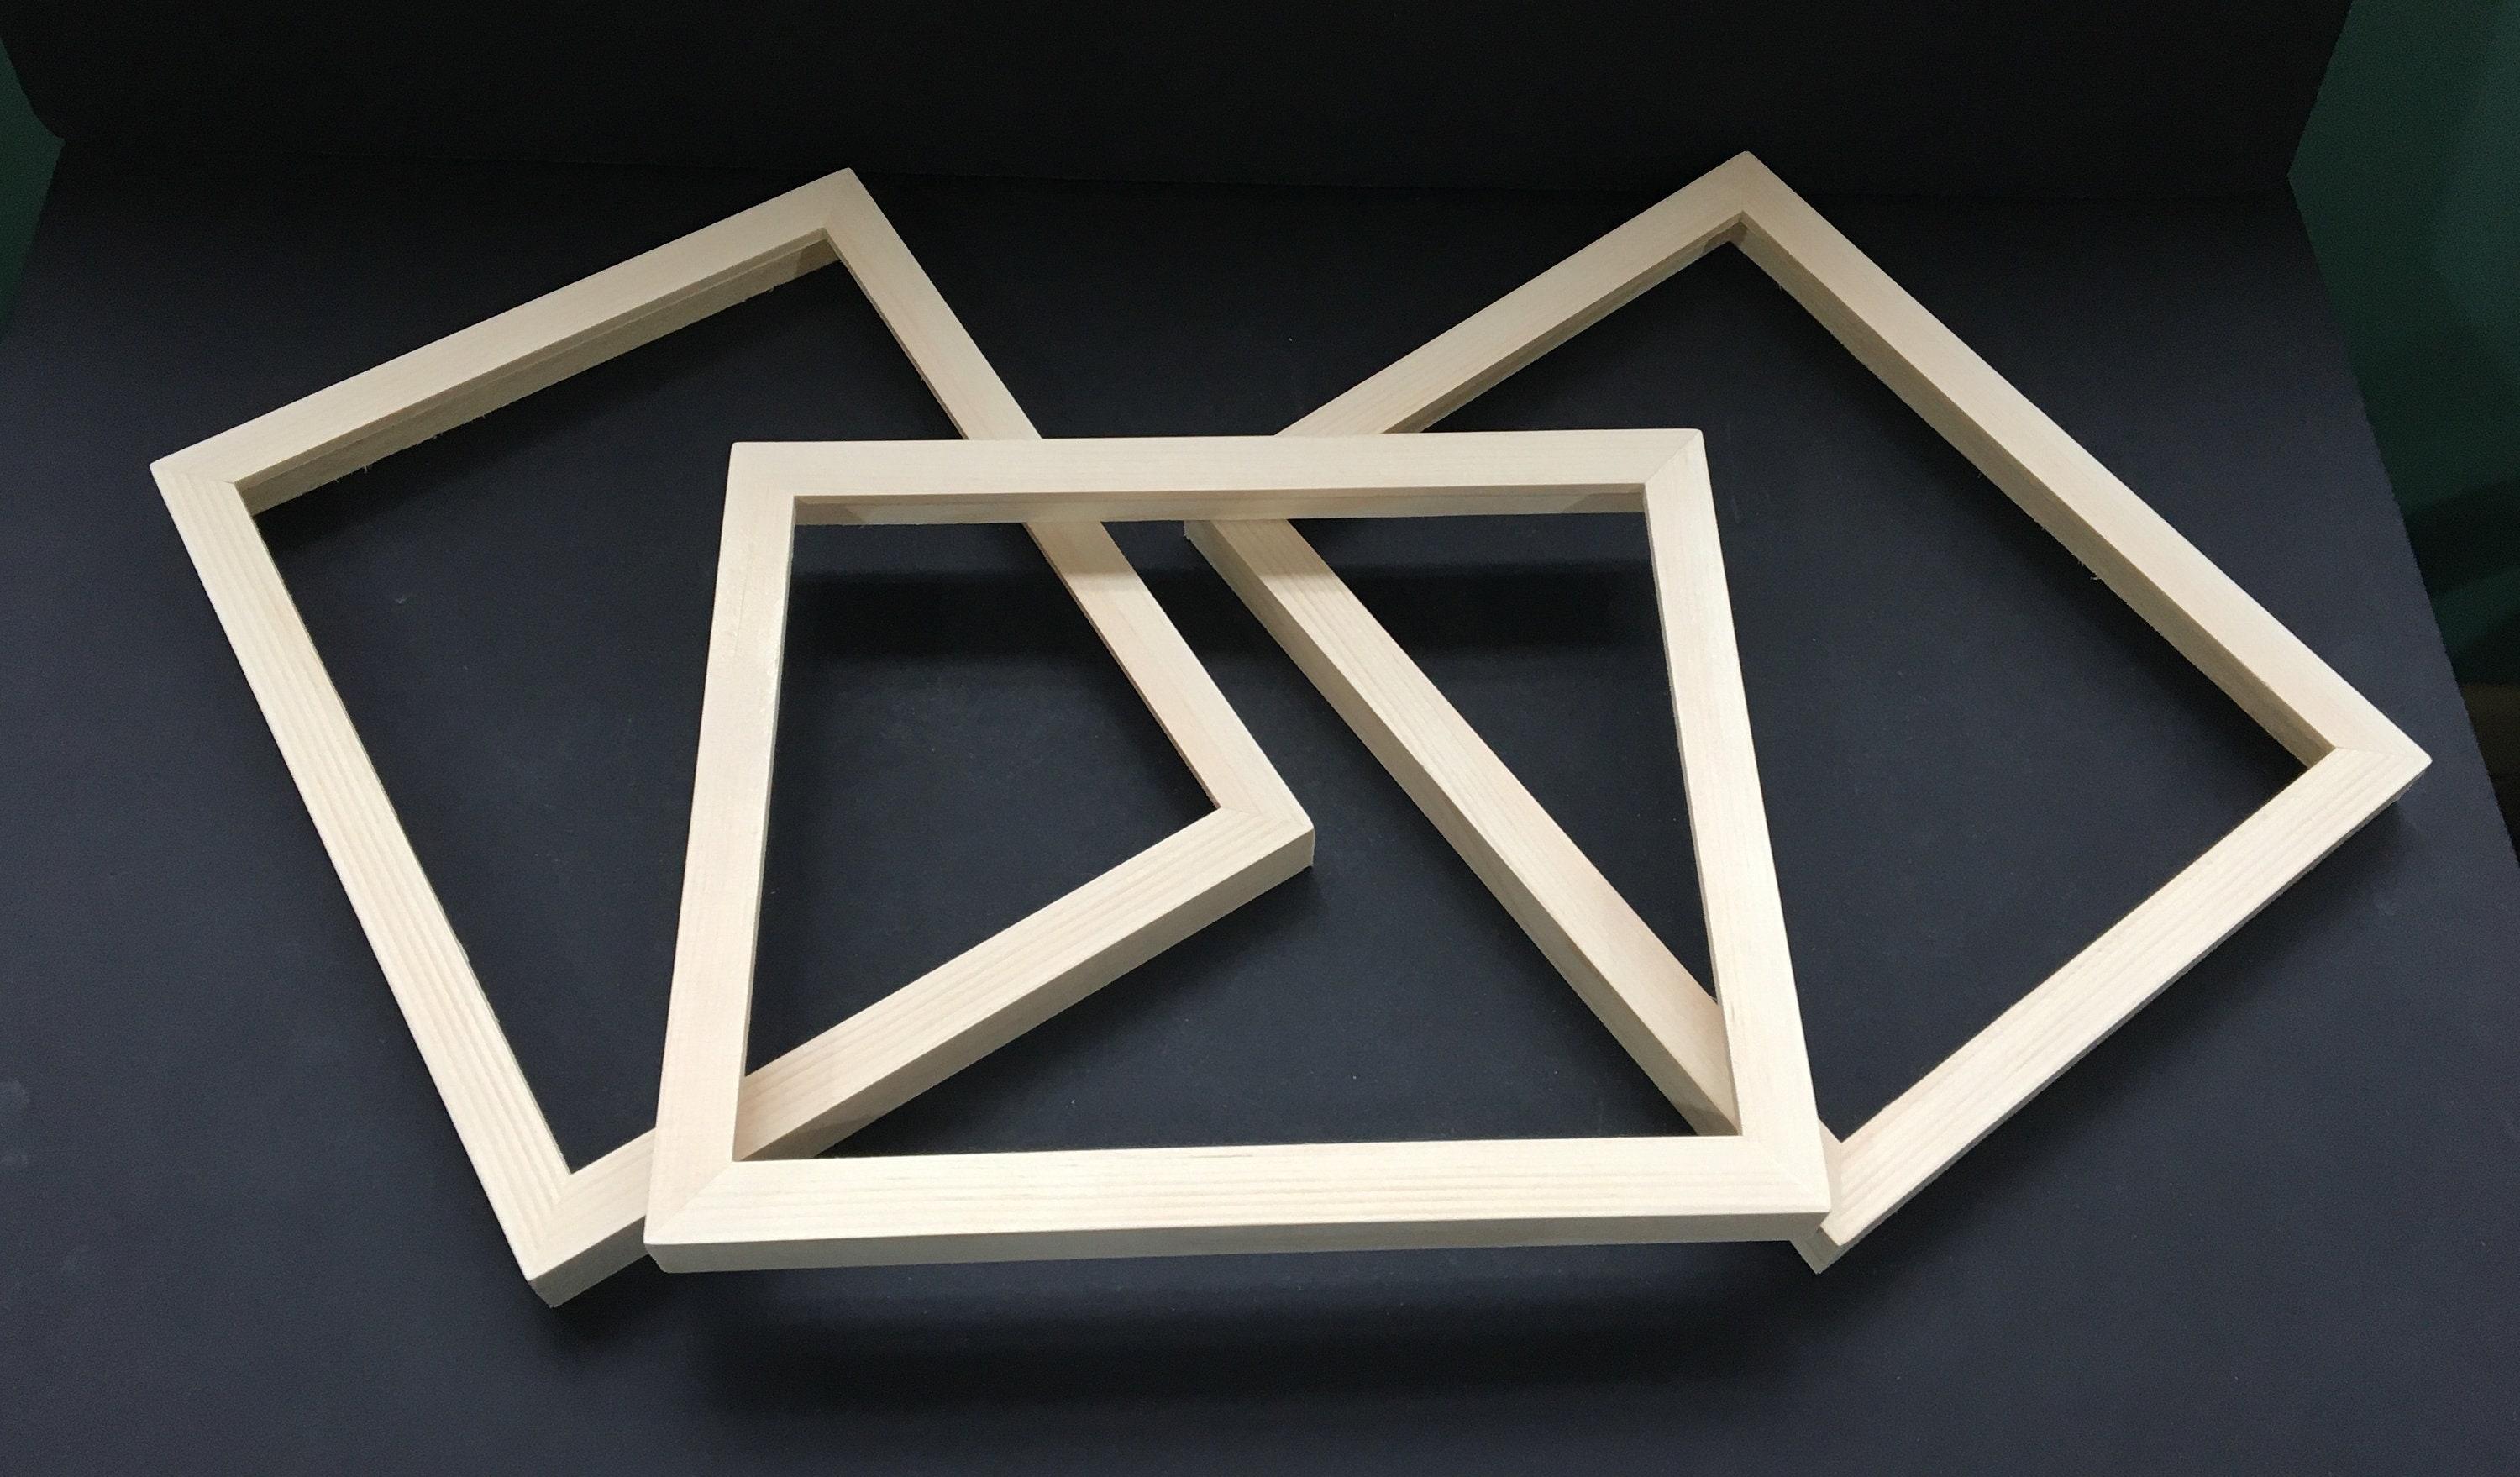 Unfinished Wooden Frames in Bulk, Premium Frames From Solid Birch Hardwood  1.34 Wide, Any Custom Size A1, A2, A3, 11x14, 12x18, 18x24 